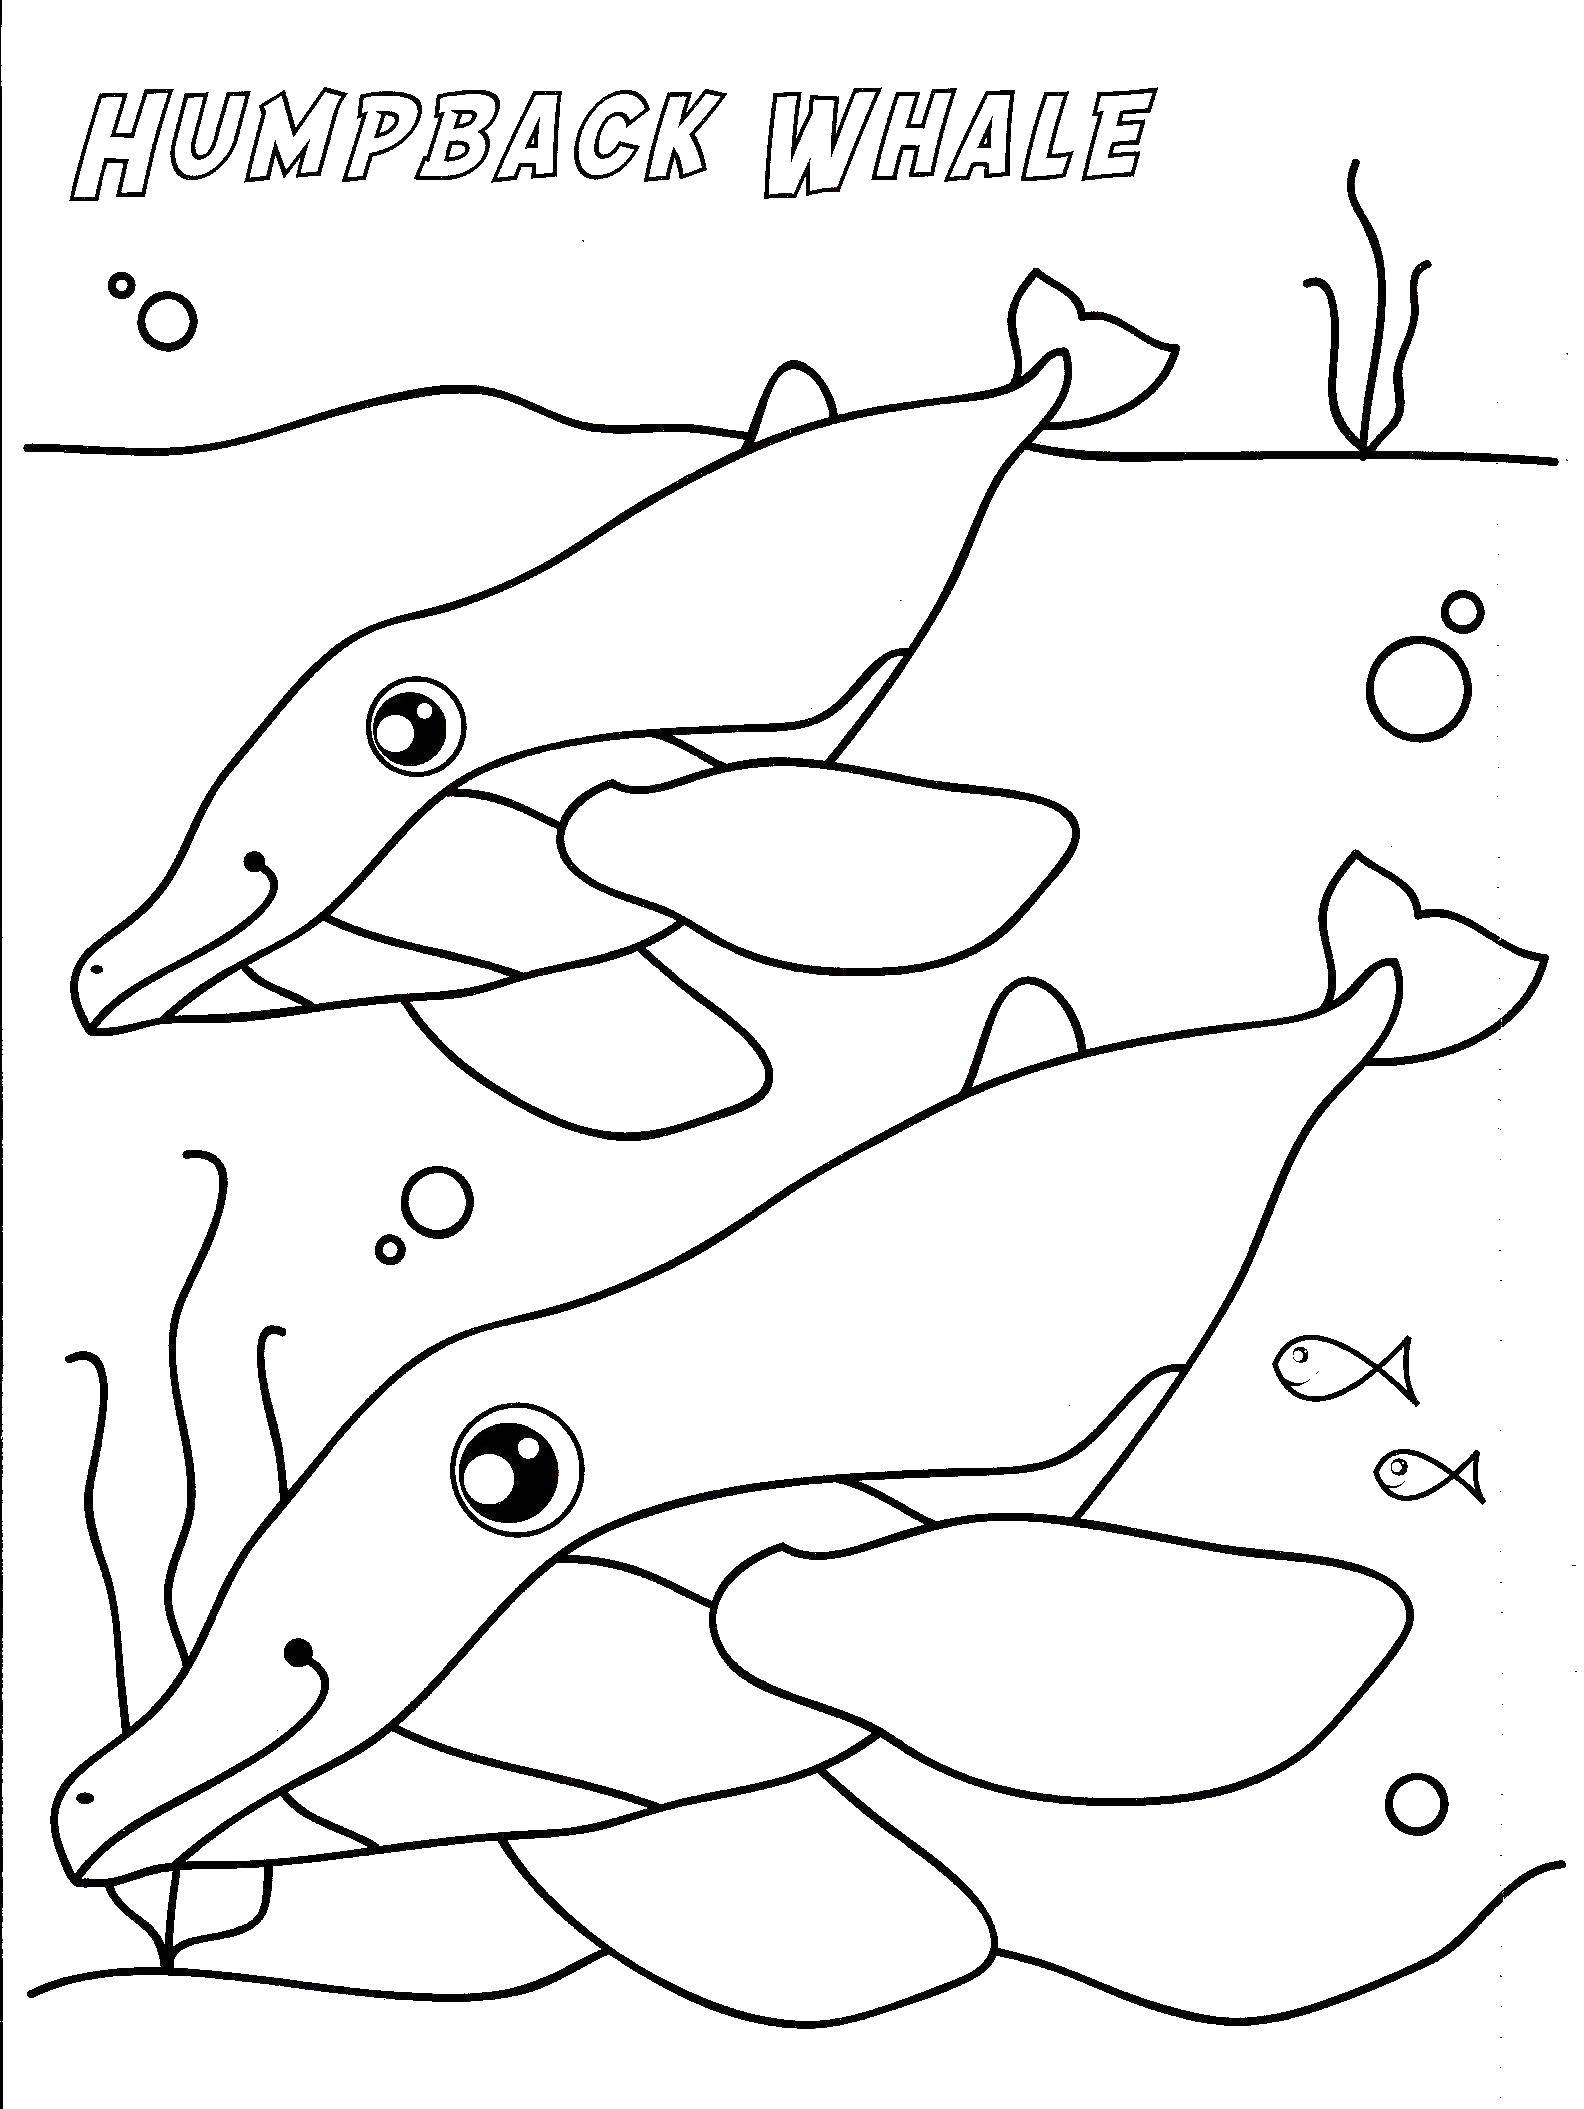 Coloring Large whales. Category marine. Tags:  Underwater world, fish.